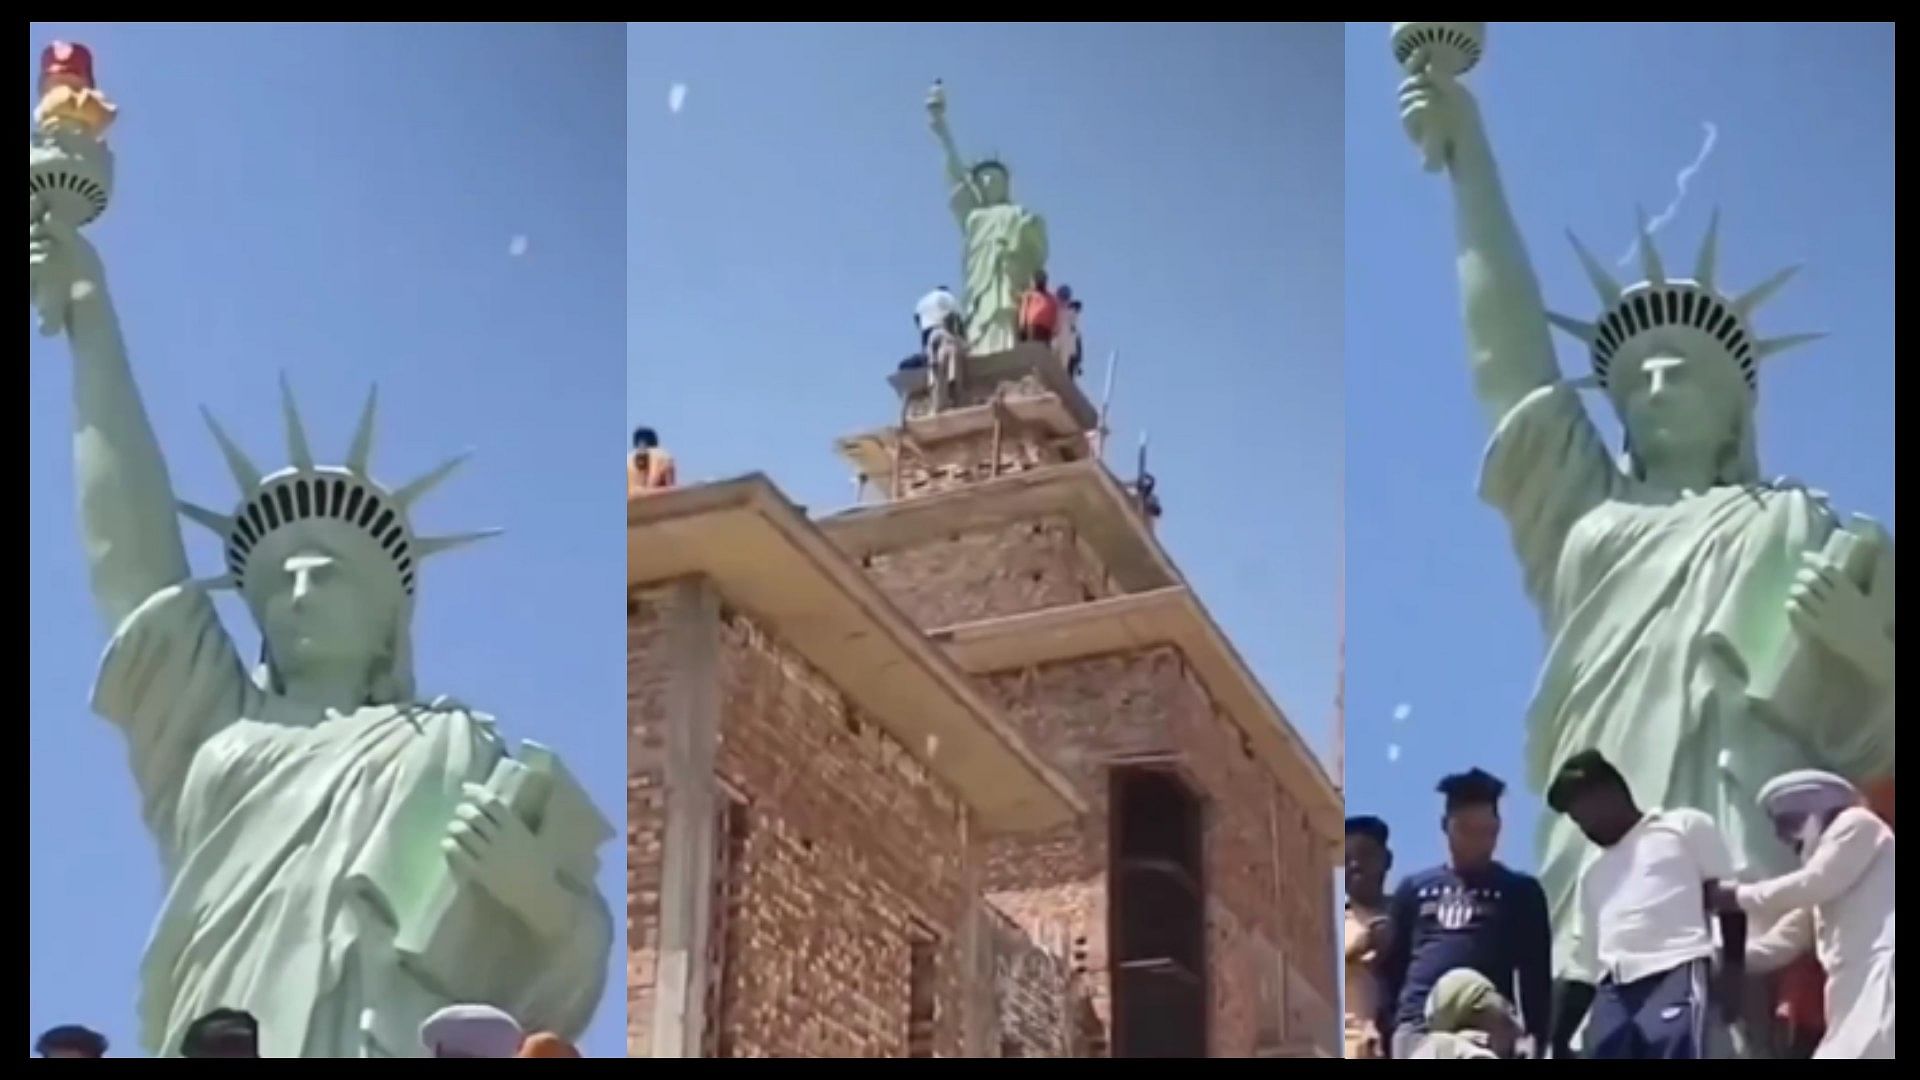 A man from Punjab made a copy of the Statue of Liberty on the rooftop video went viral on social media